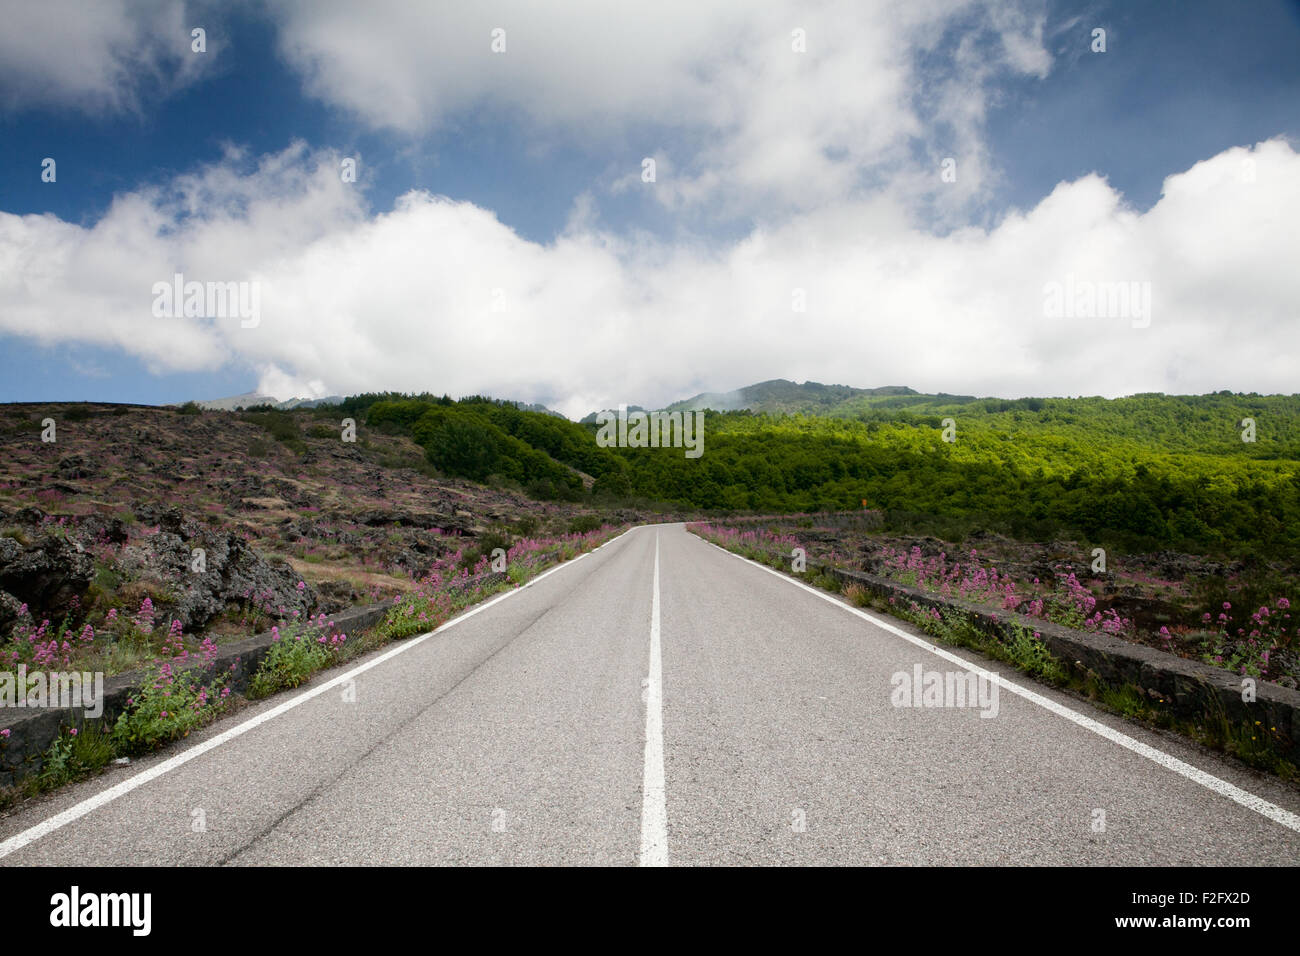 Road blue sky with white clouds and green landscape Stock Photo